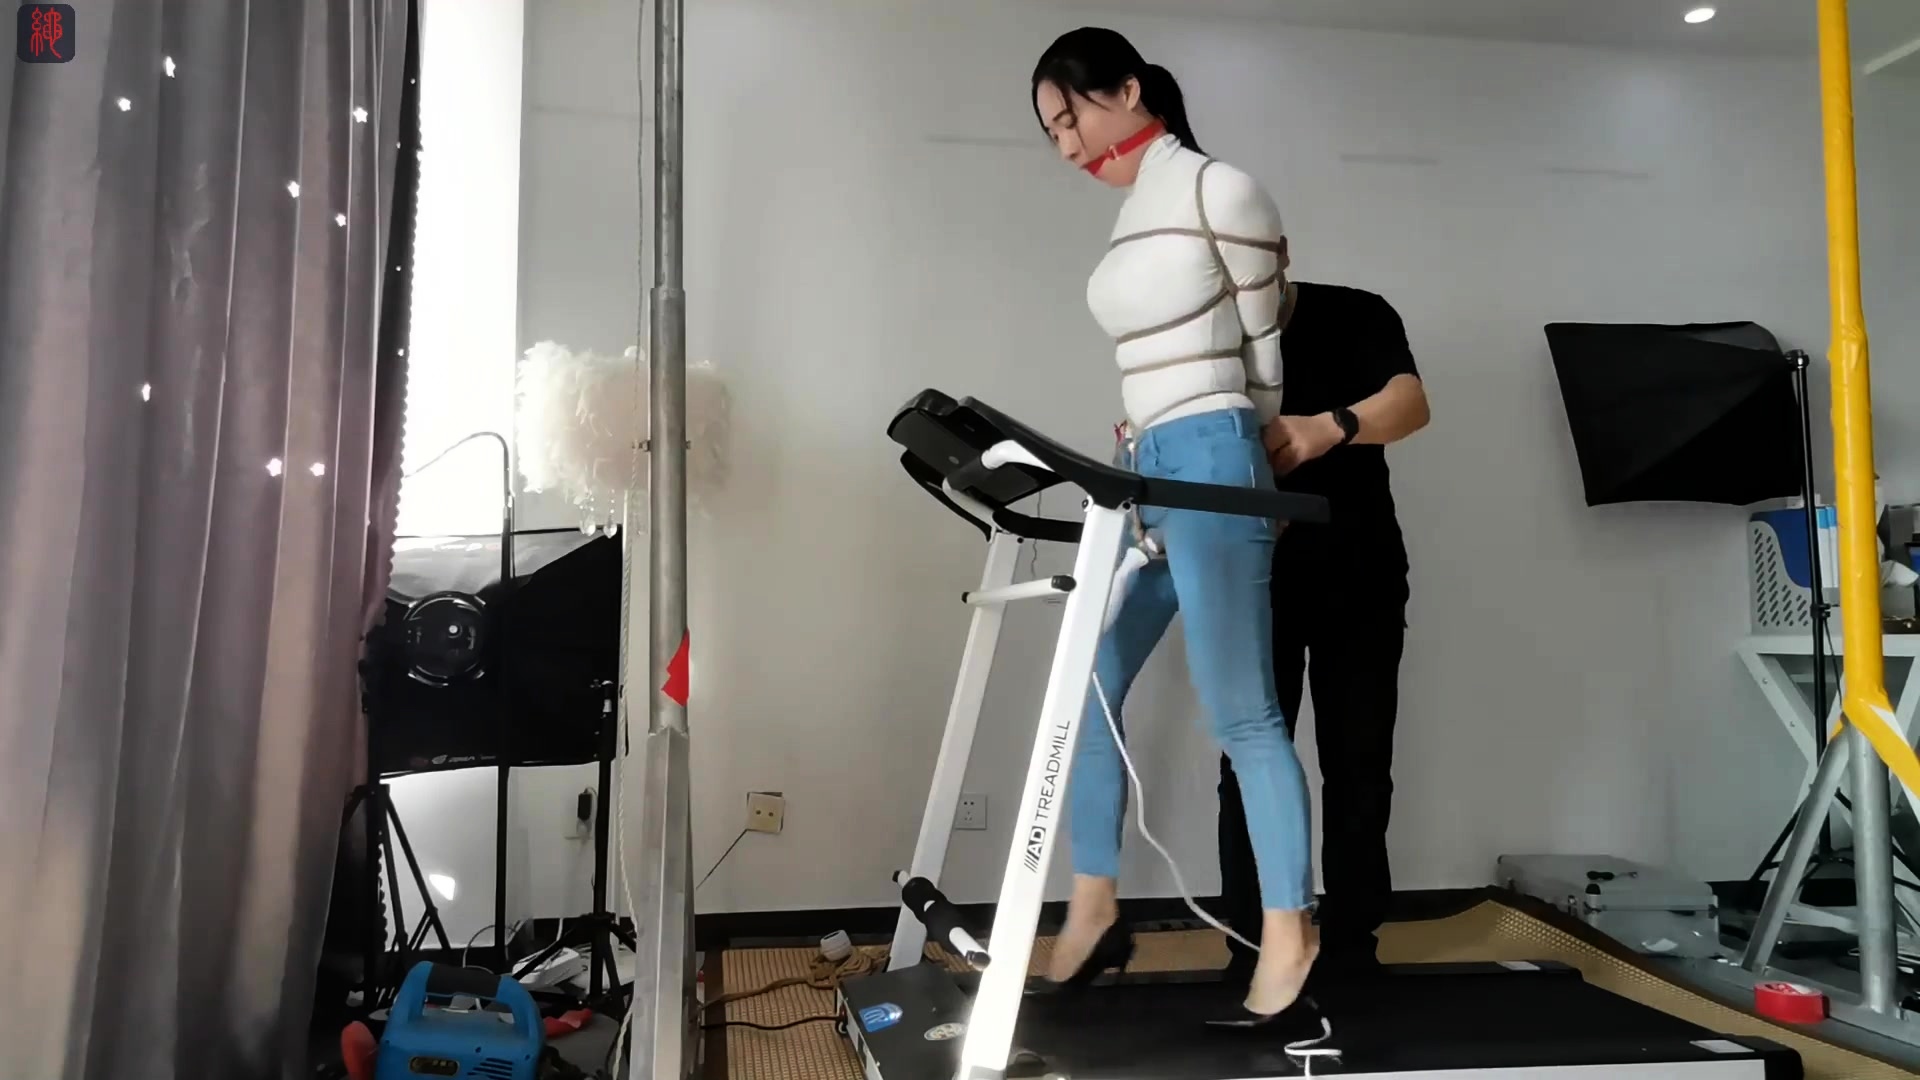 Bound And Gagged Sex Asian Ass - Bound And Gagged Asian Babe Walks On Treadmill In High Heels Video at Porn  Lib